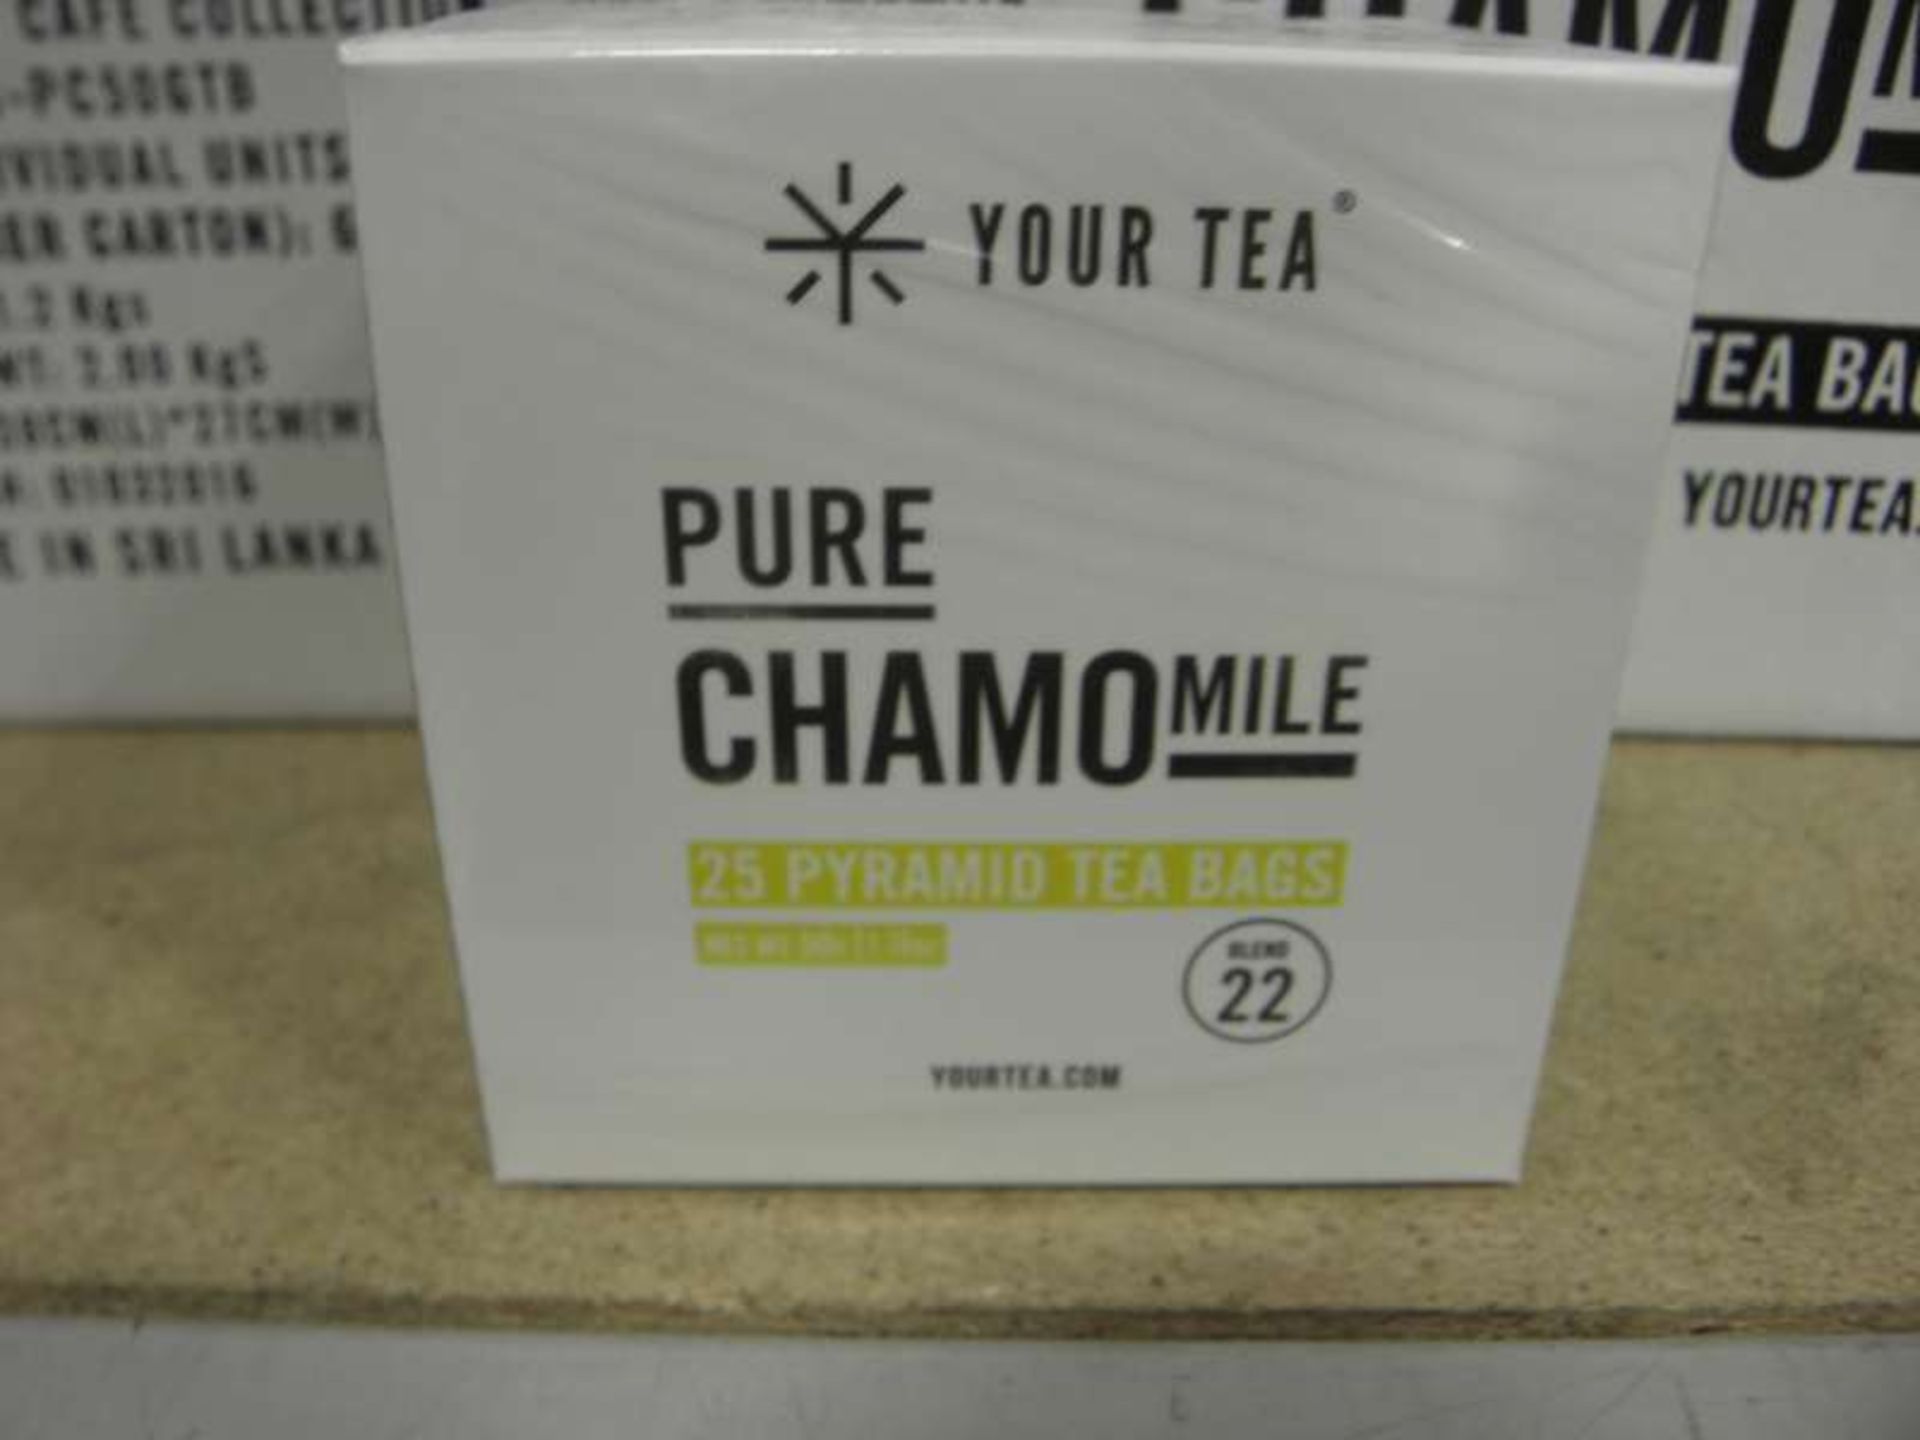 72 X BOXES OF 25 PYRAMID PURE CHAMOMILE YOUR TEA TEABAGS IN 3 BOXES ( EXP 01/01/2019 )